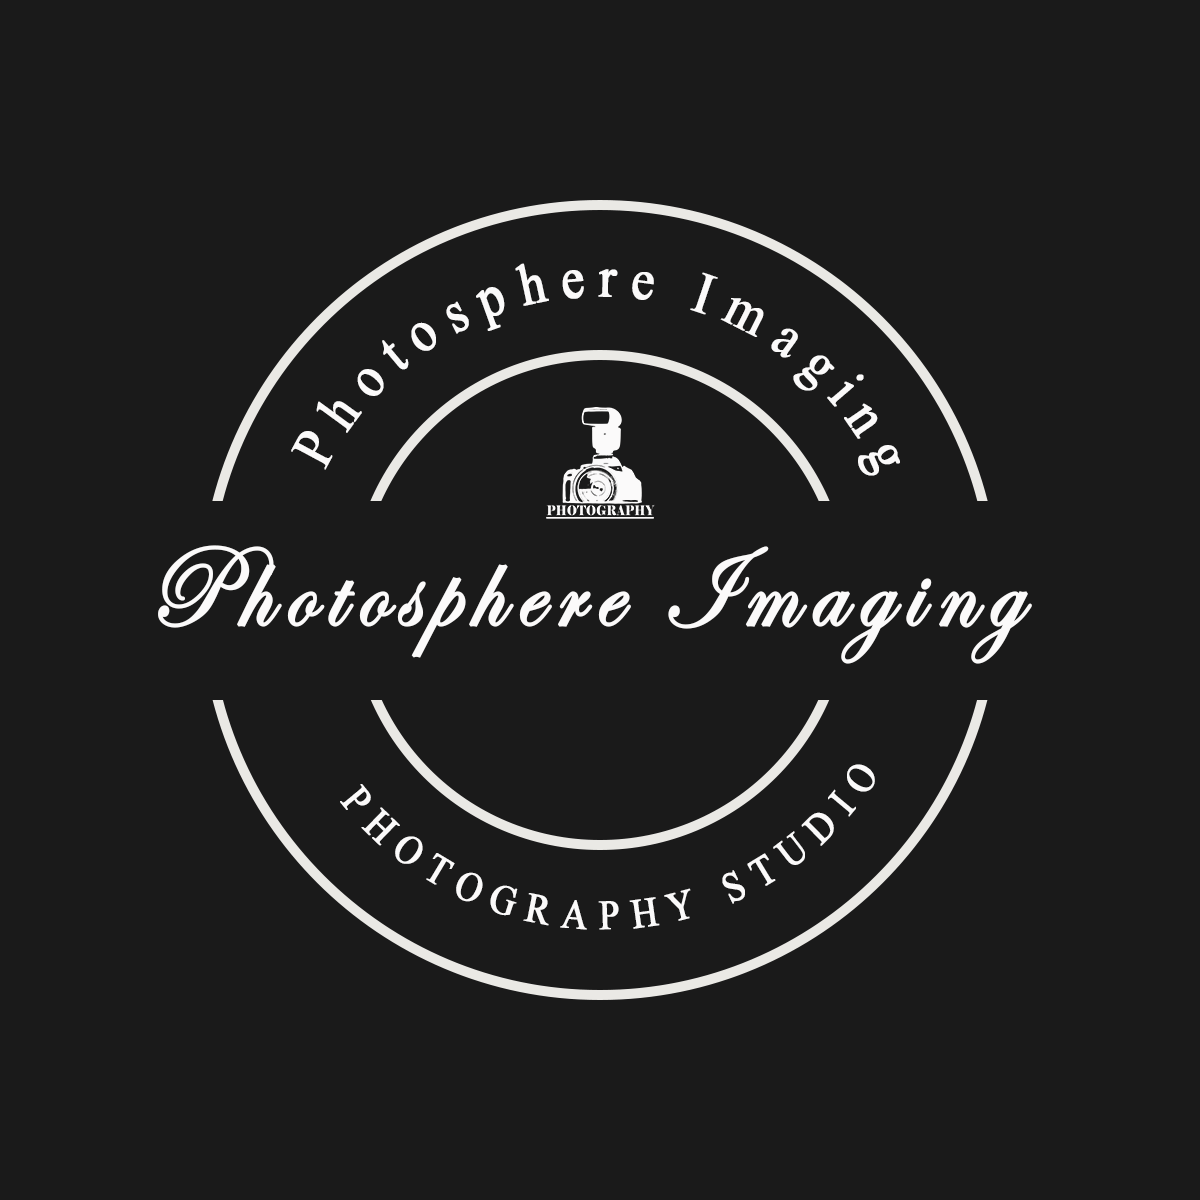 Photography logo template camera silhouette outline Vectors graphic art  designs in editable .ai .eps .svg .cdr format free and easy download  unlimit id:6921461